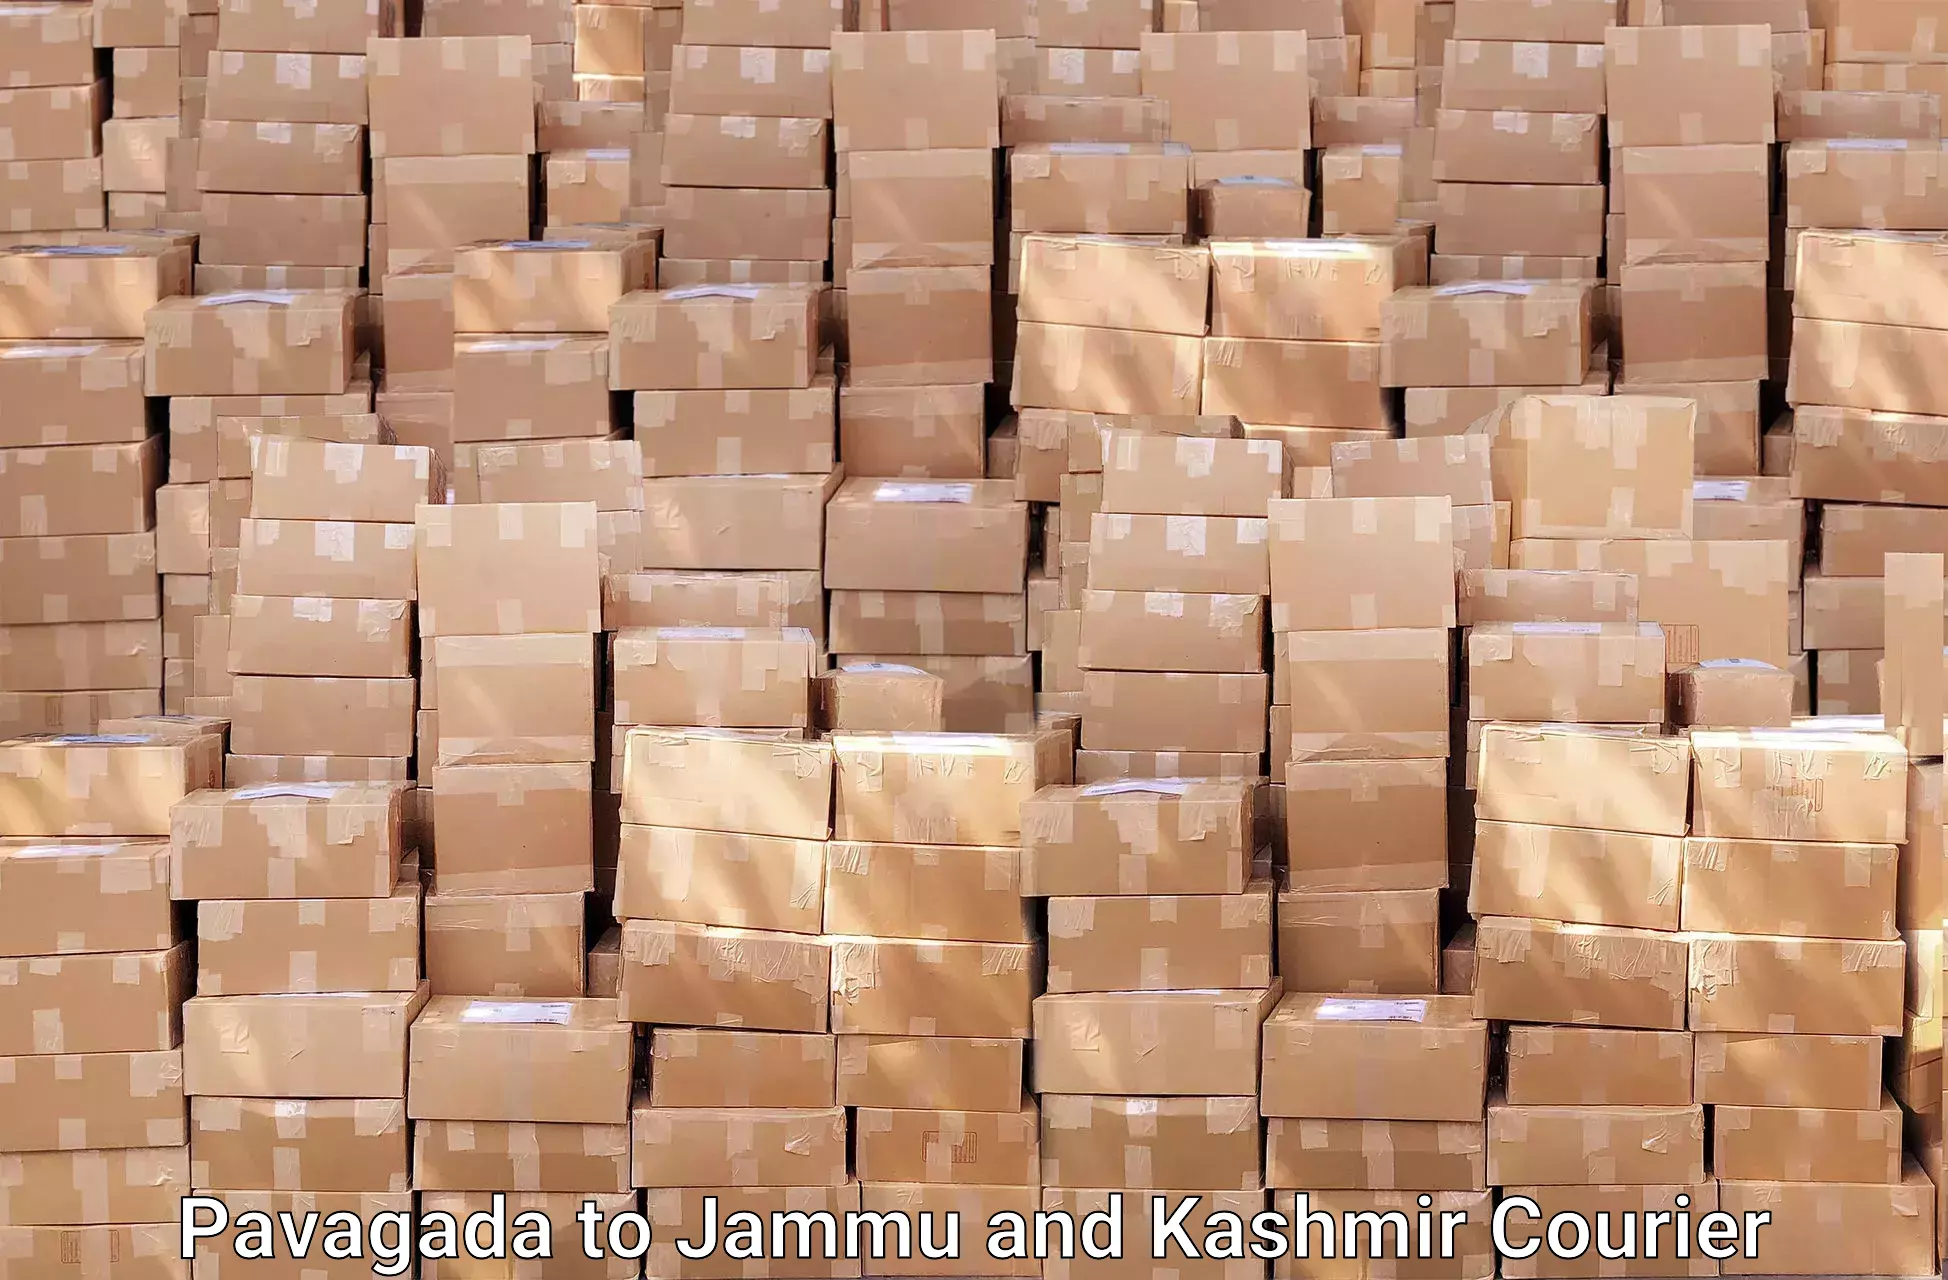 Moving and handling services Pavagada to Jammu and Kashmir